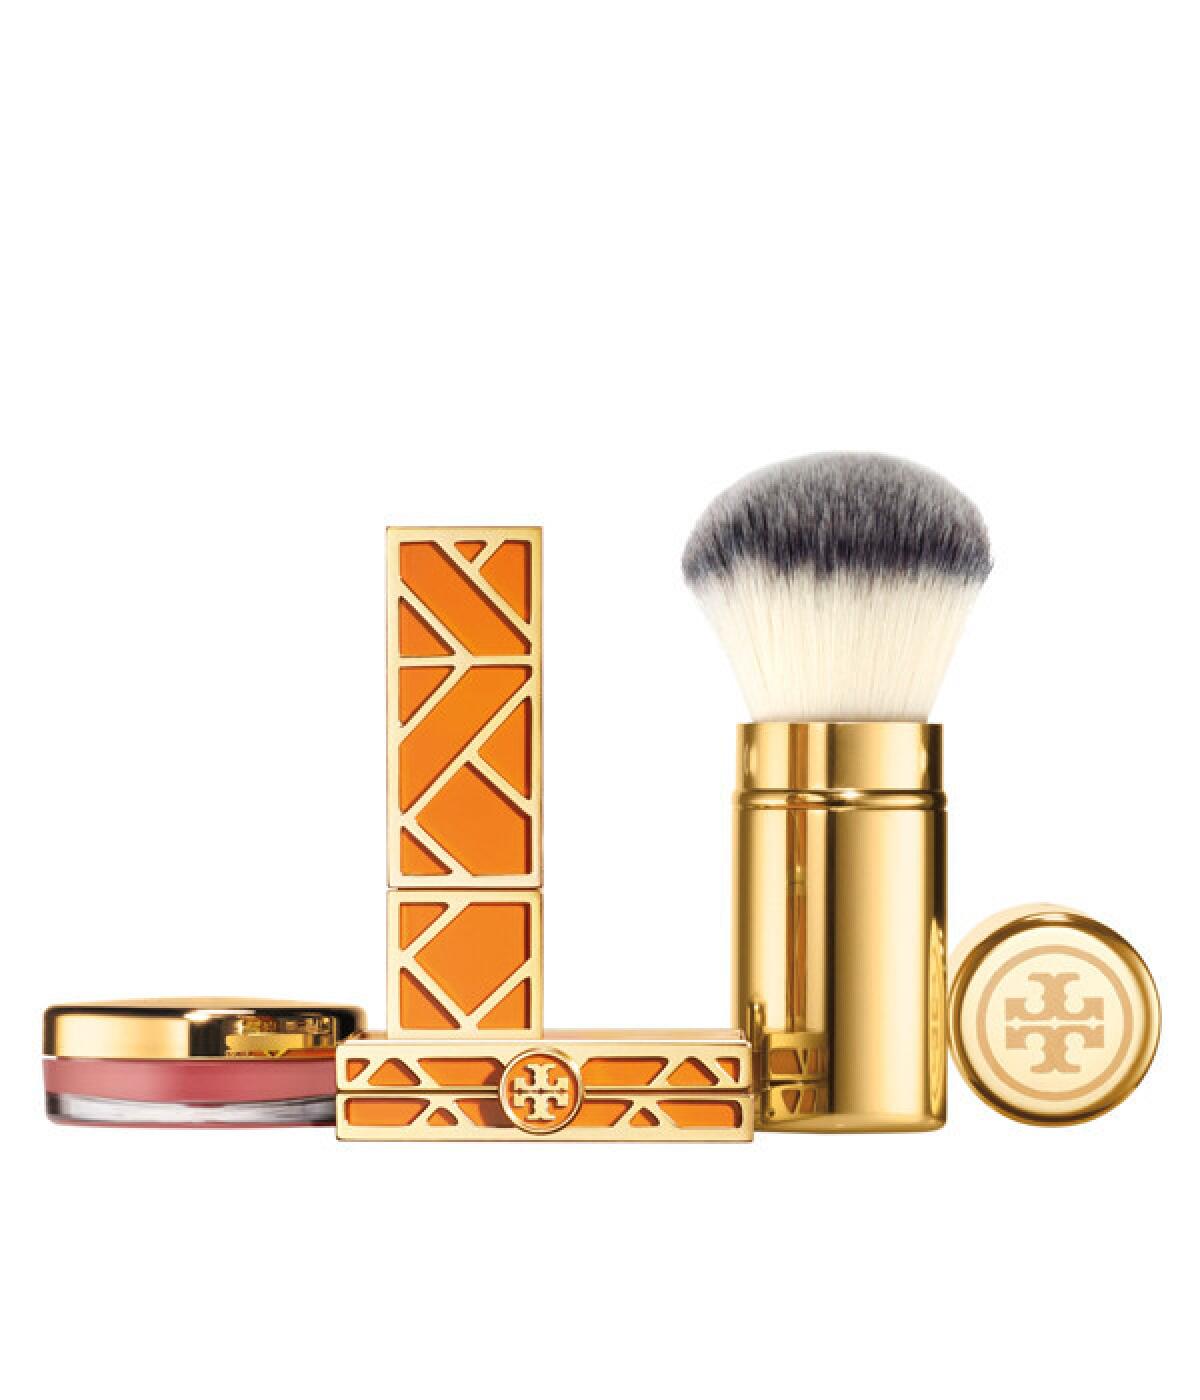 Tory Burch cosmetics collection ($32-$48) at toryburch.com.